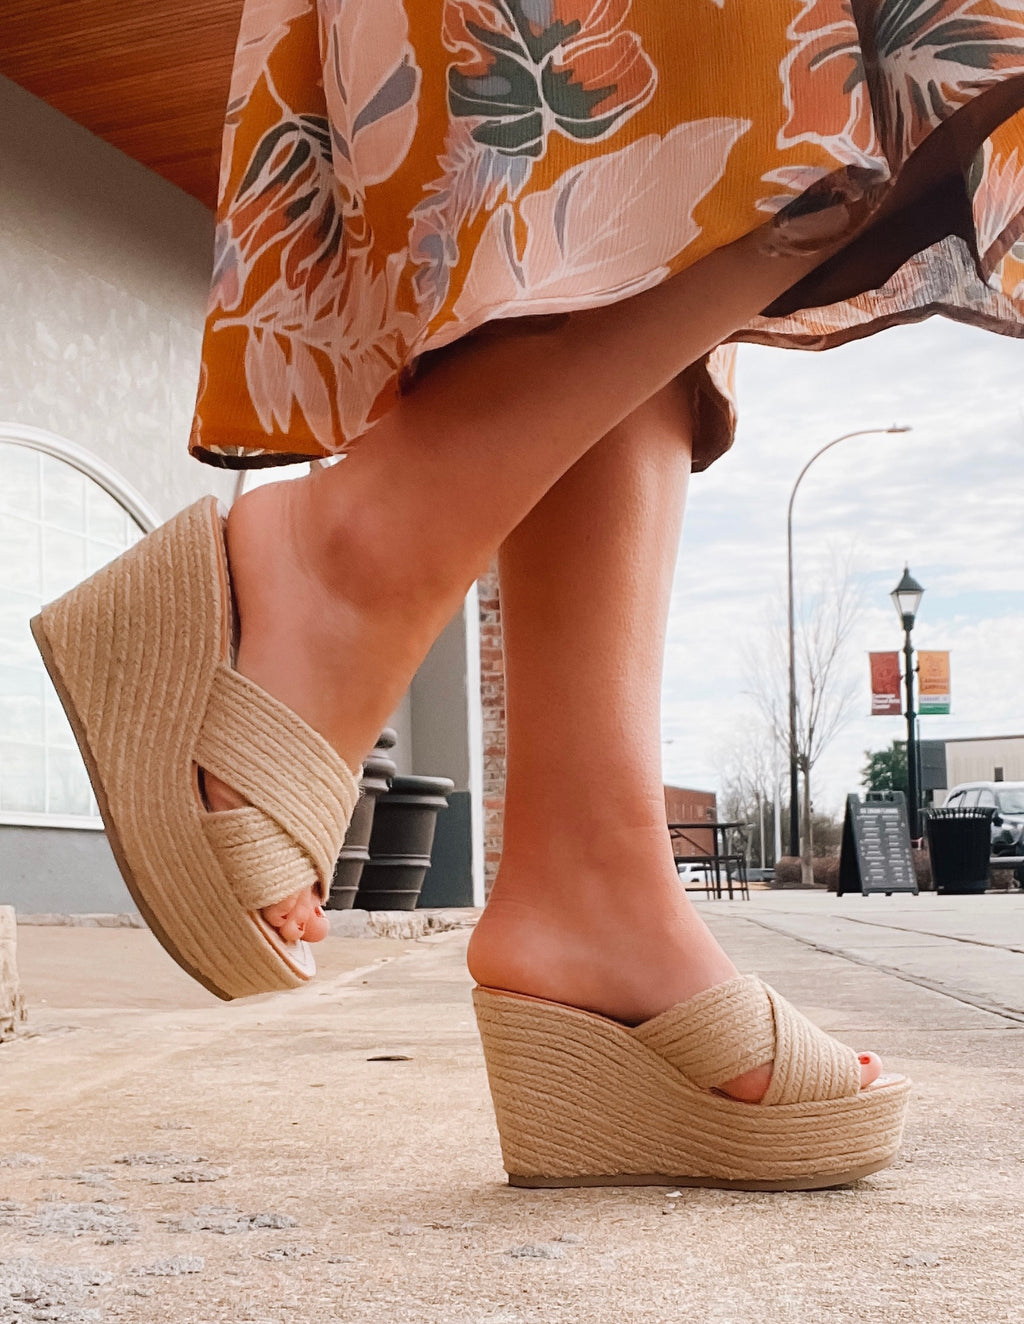 These Cutest Quality Wedges represent the pinnacle of footwear. Crafted from wheat-colored raffia material and featuring a stylish wedge heel, these shoes are perfect for both weekend getaways and special occasions. Their versatile design ensures you'll be able to rock them for any and all occasions.